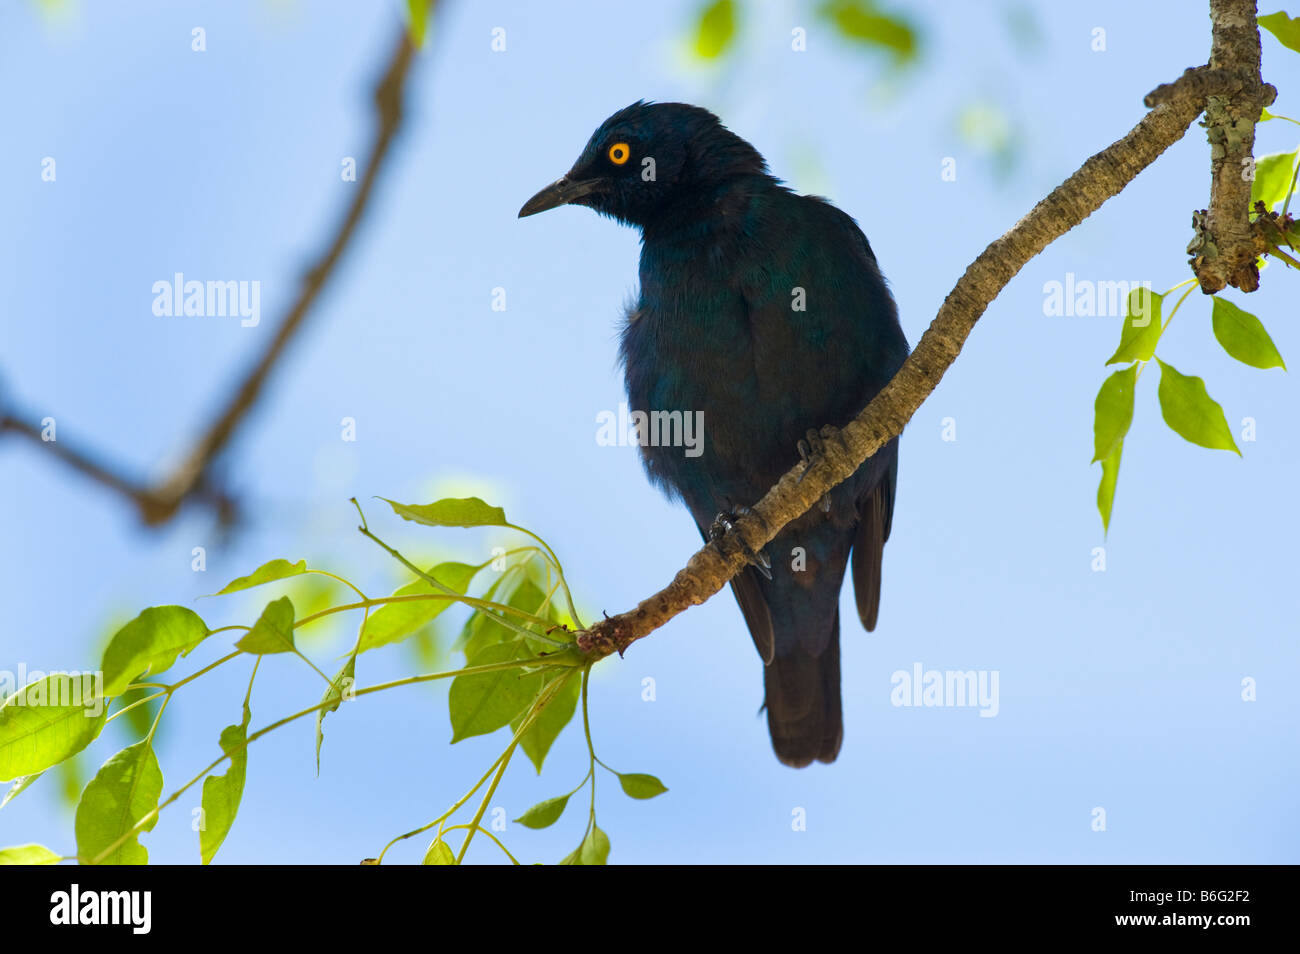 Southern GLOSSY STARLING Lamprotornis chalybaeus sitting on branch south-Afrika south africa Bird southern Africa reverine fores Stock Photo